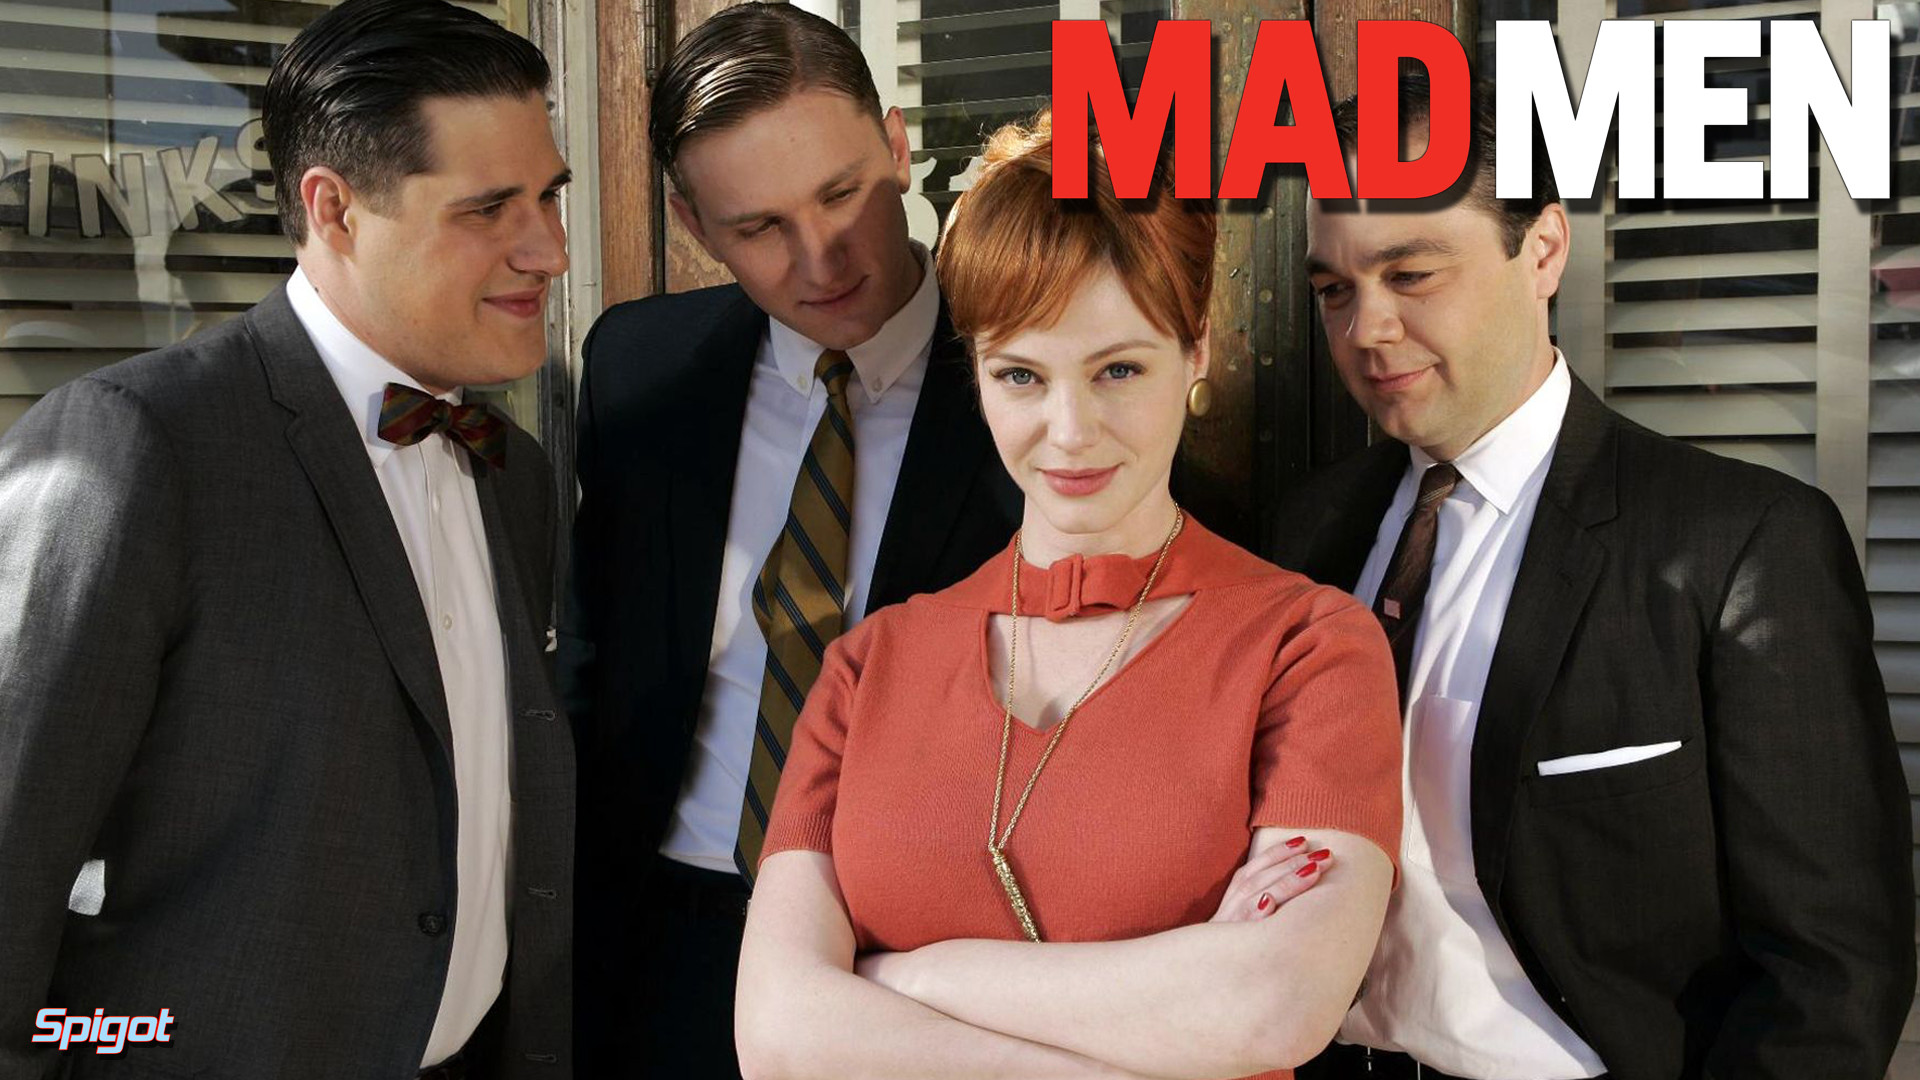 1920x1080 MAD MEN Wallpapers. Here ...